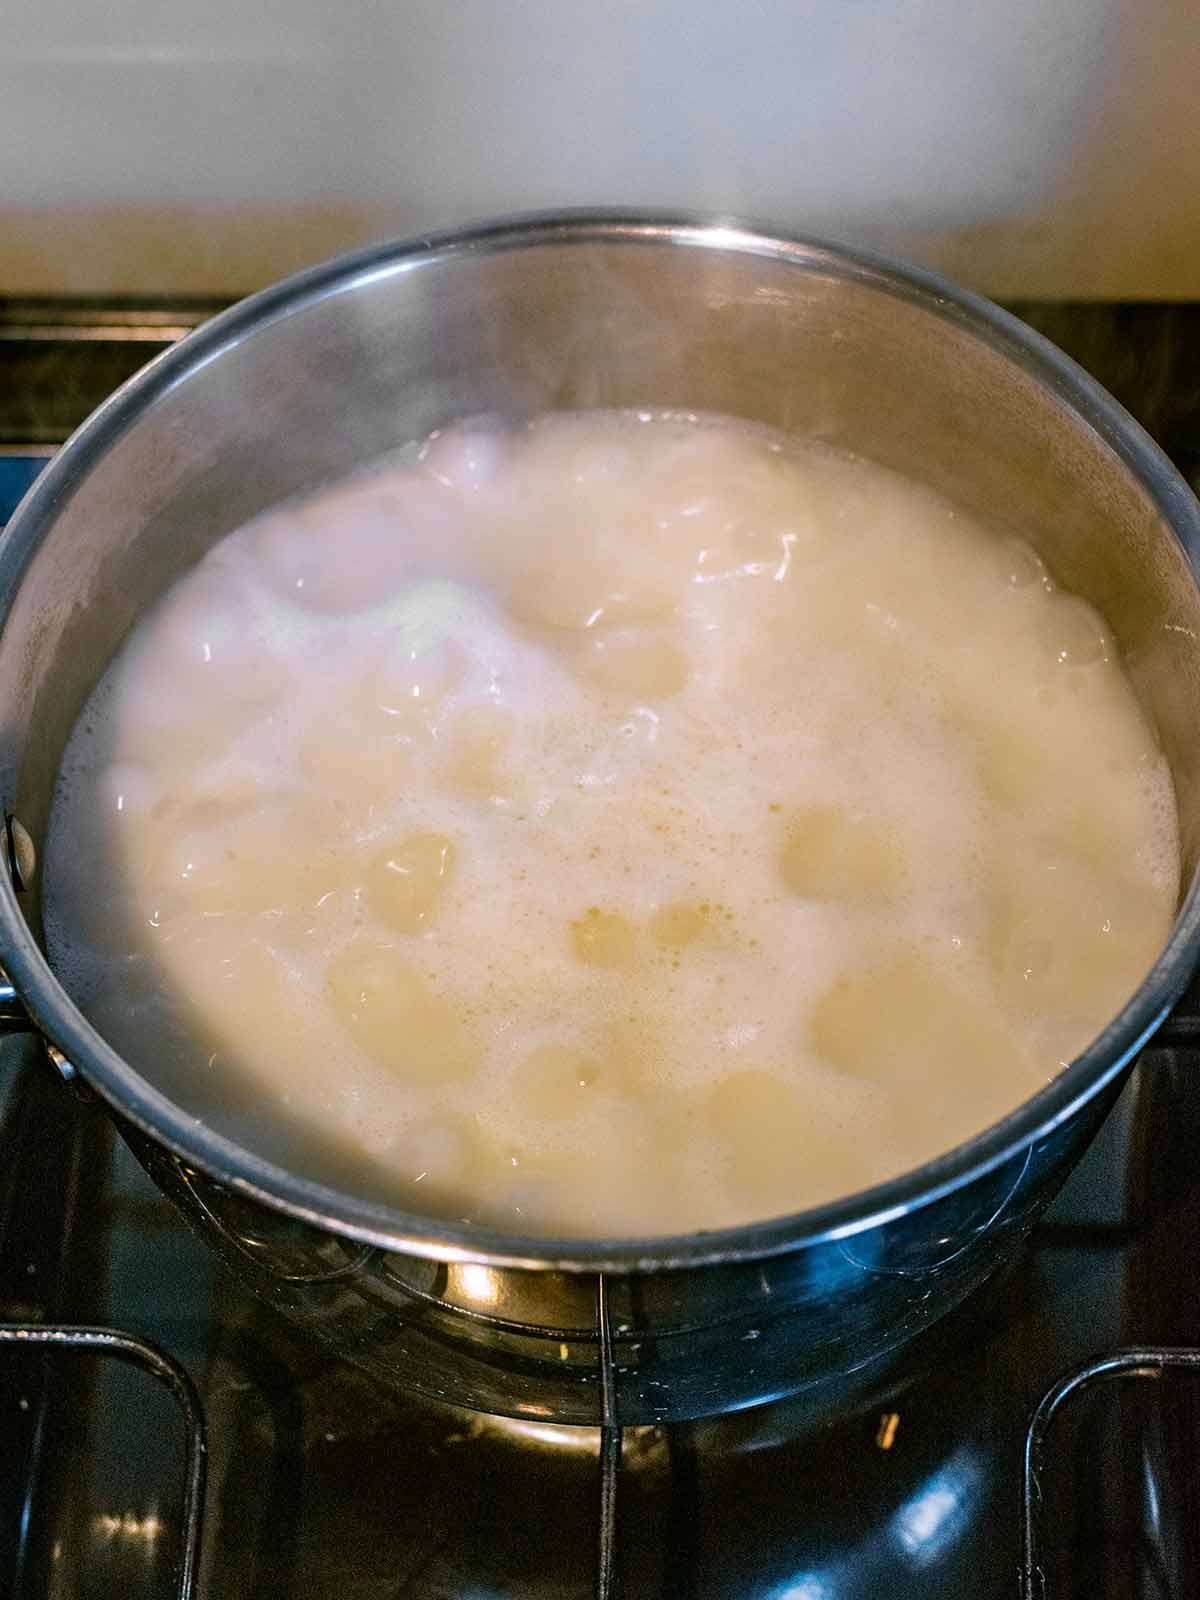 A pan of rice boiling on a hob.